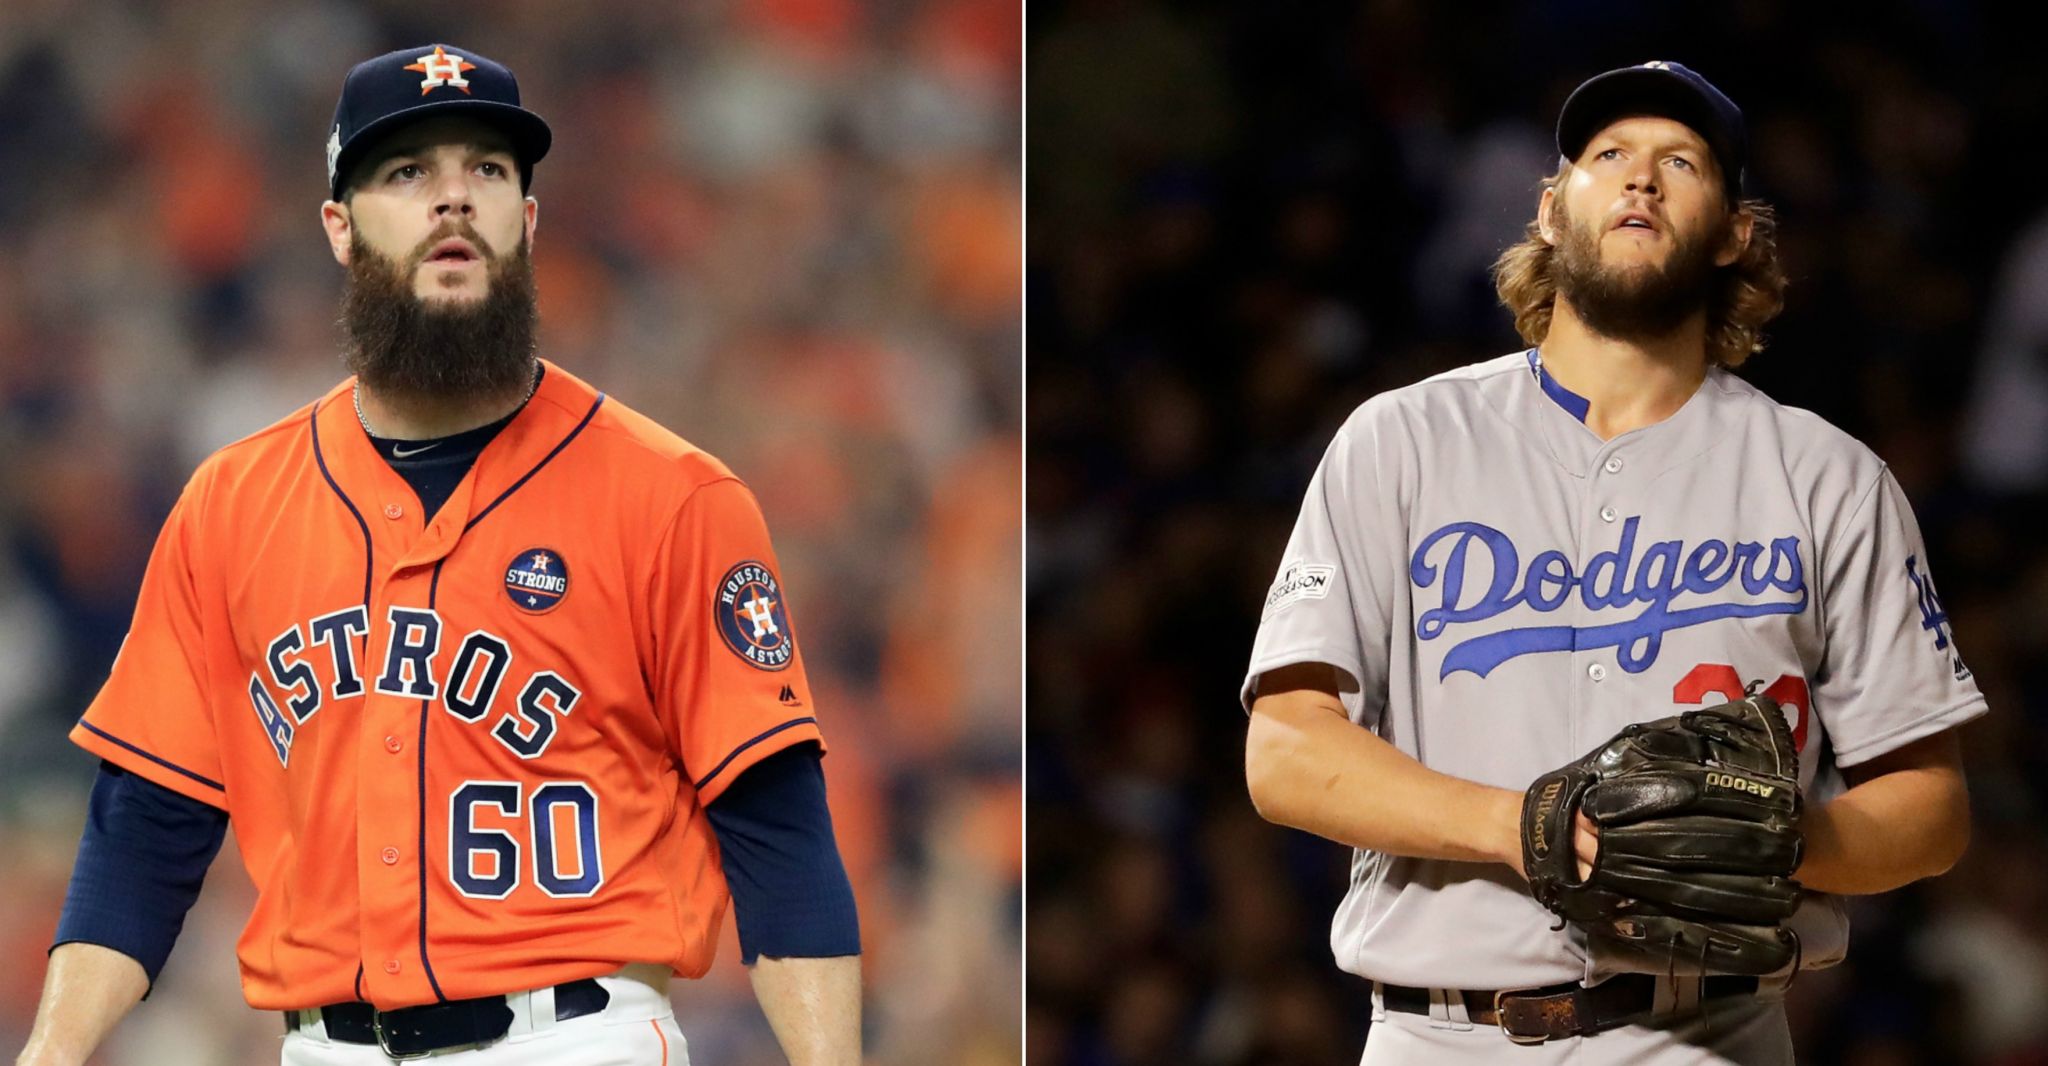 Fall Classic pits 100-win teams - Dodgers and Astros - for the first time  since 1970